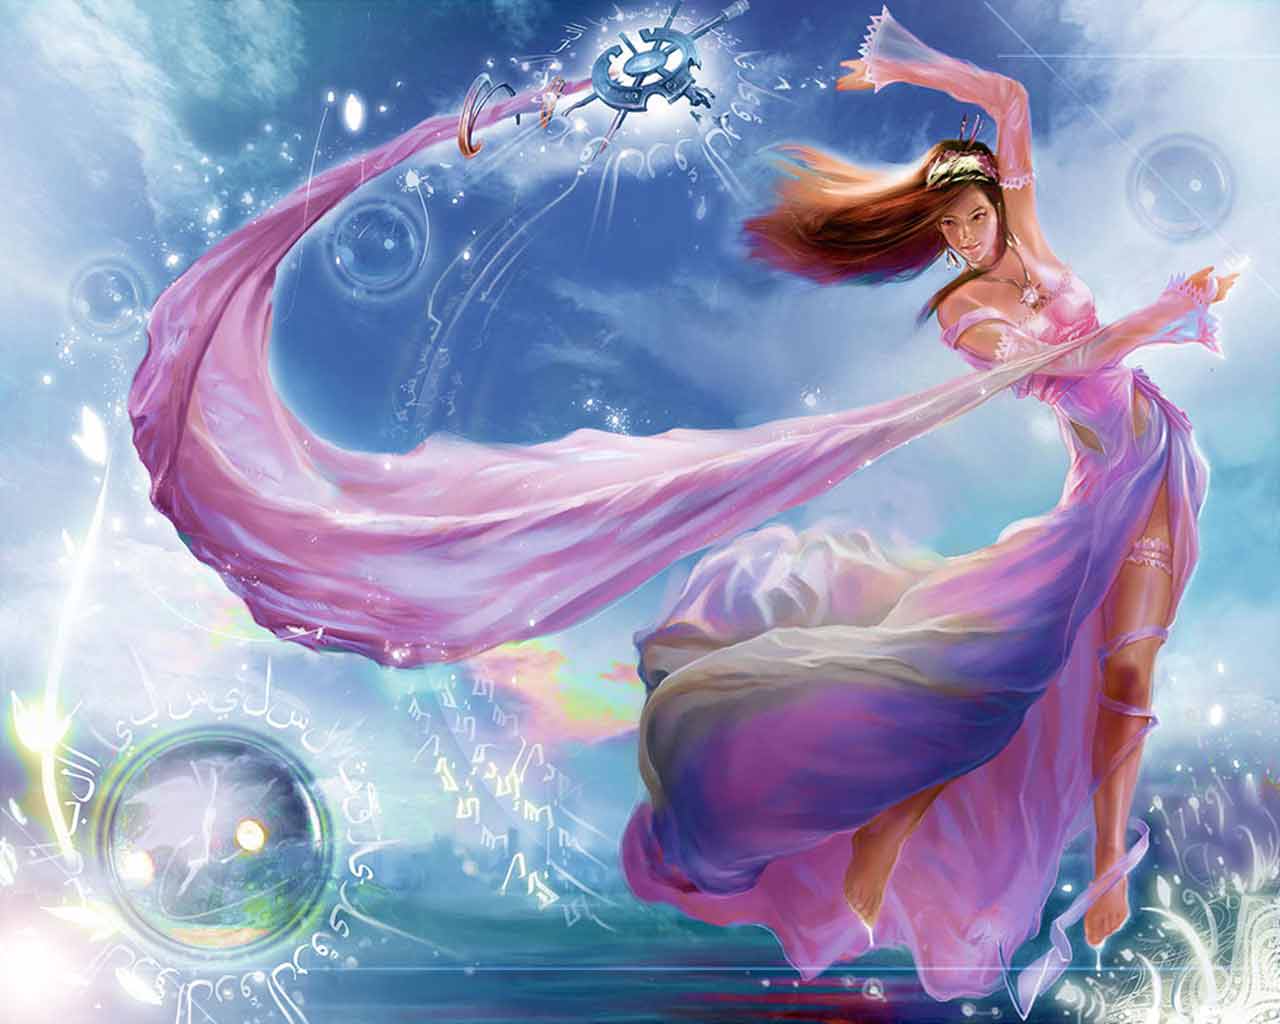 Beautiful Fairies Wallpaper Image & Picture